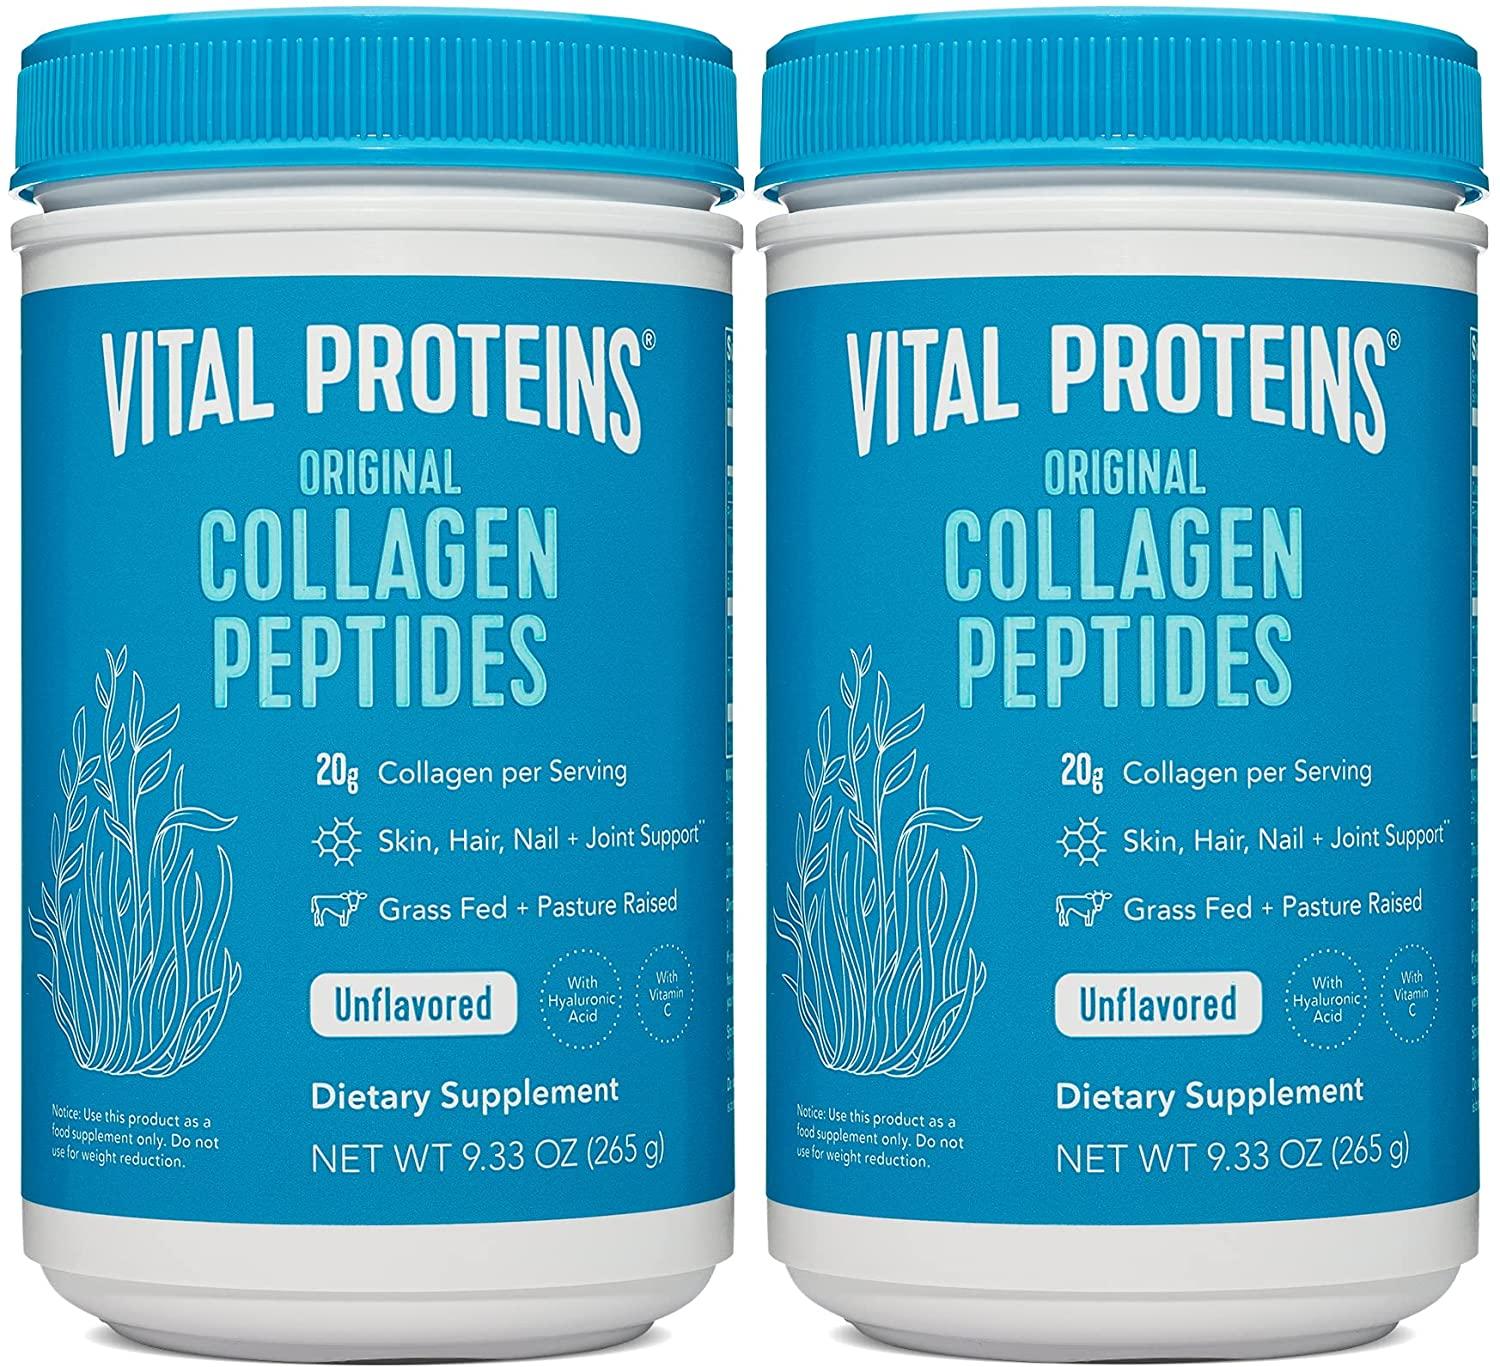 2 Vital Proteins Collagen Peptides Powder Supplement for $35.96 Shipped